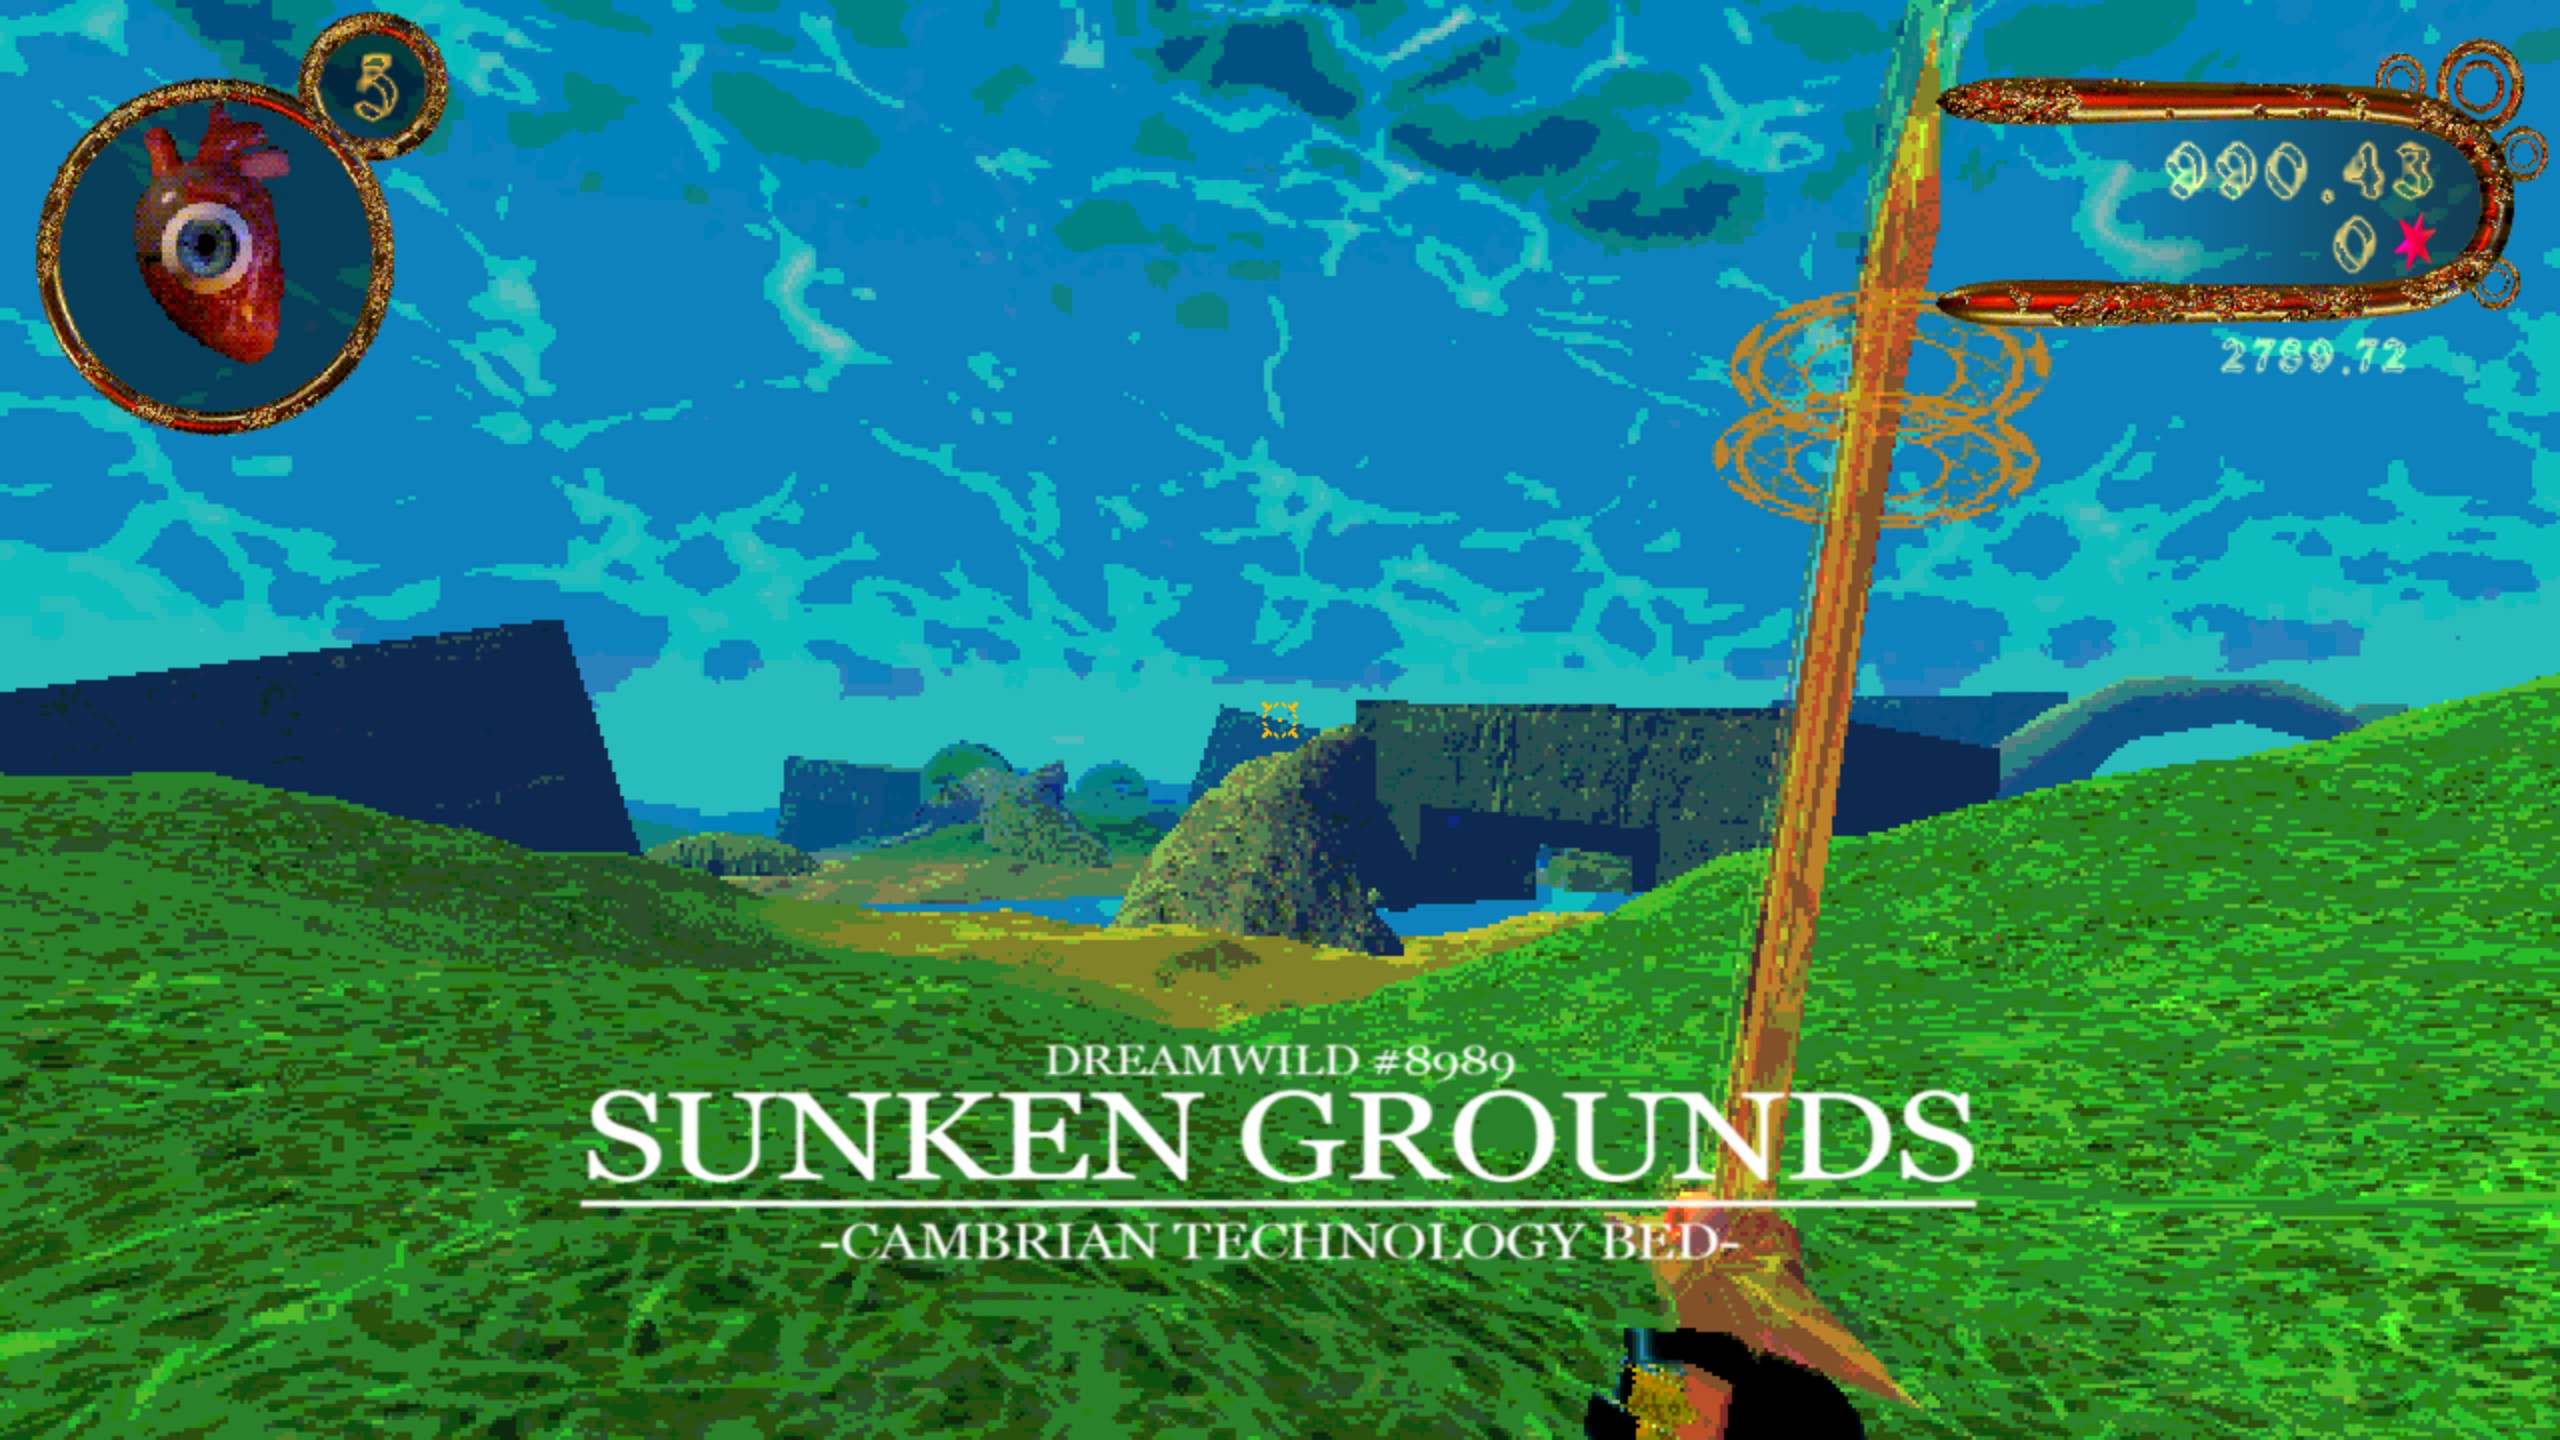 Dreamwild's brightest area, all green and blue, text reading Sunken Grounds